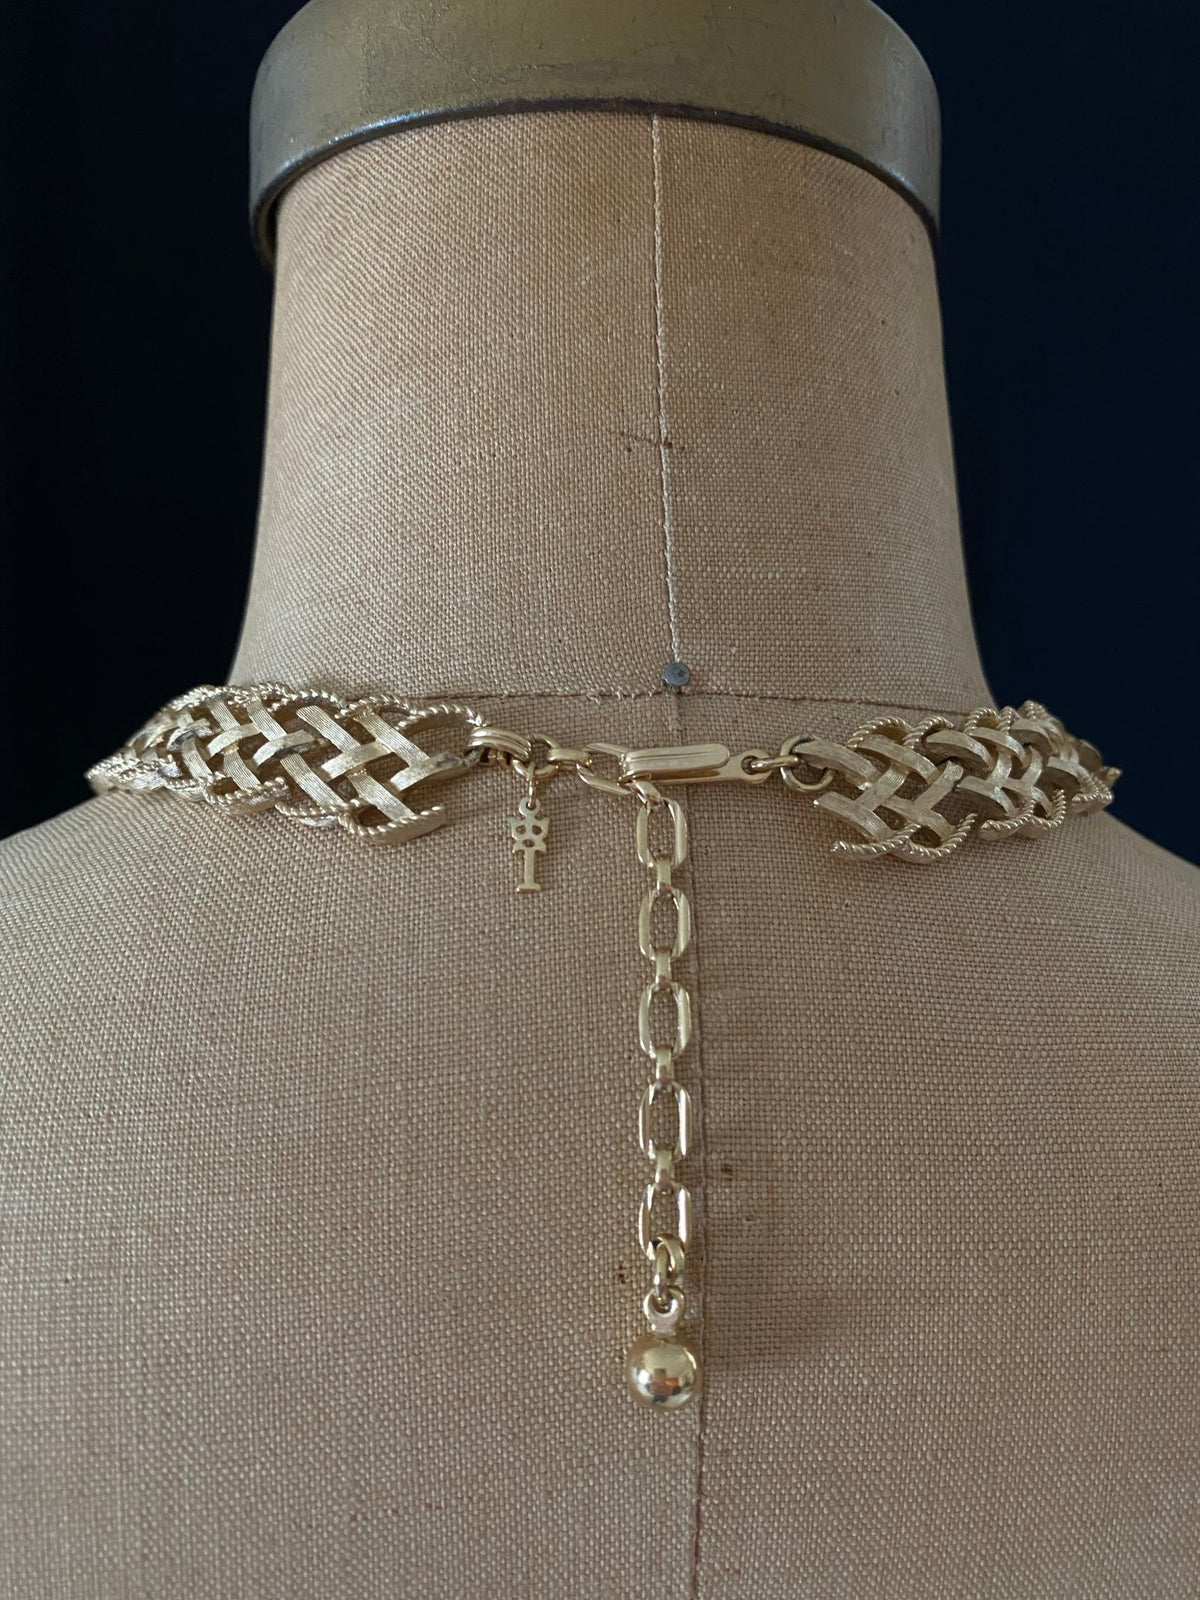 Trifari Vintage Jewelry Gold Basket Weave Link Necklace - 24 Wishes Vintage Jewelry